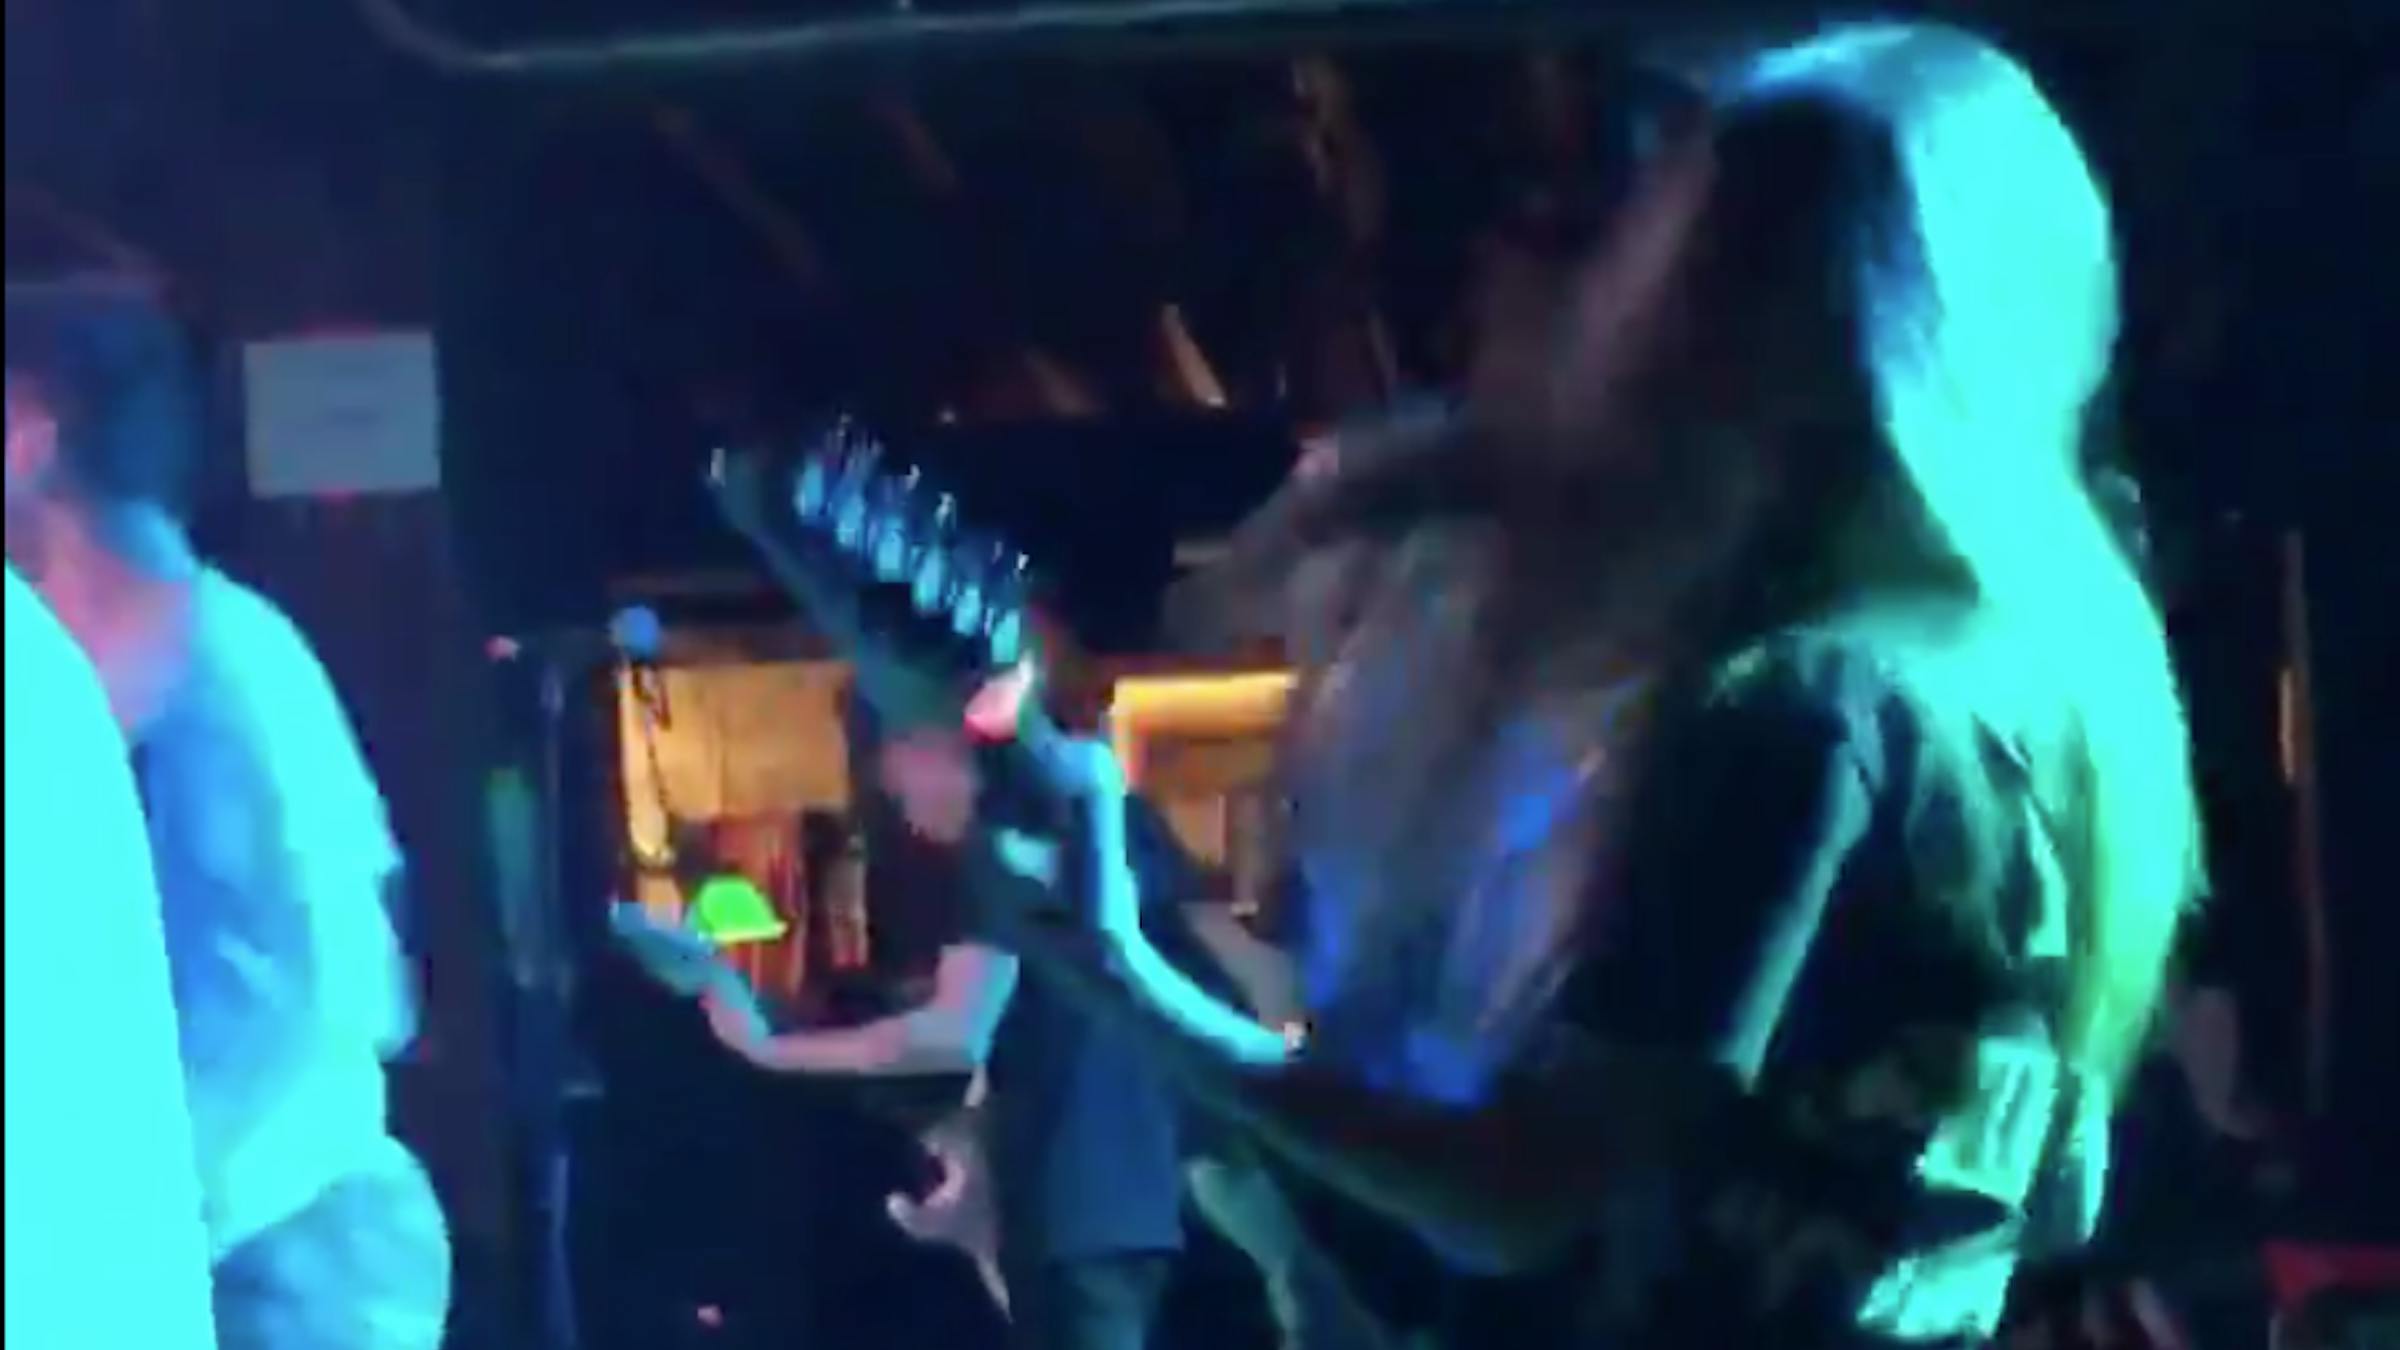 Watch A 14-Year-Old Fan Shred Onstage With Counterparts